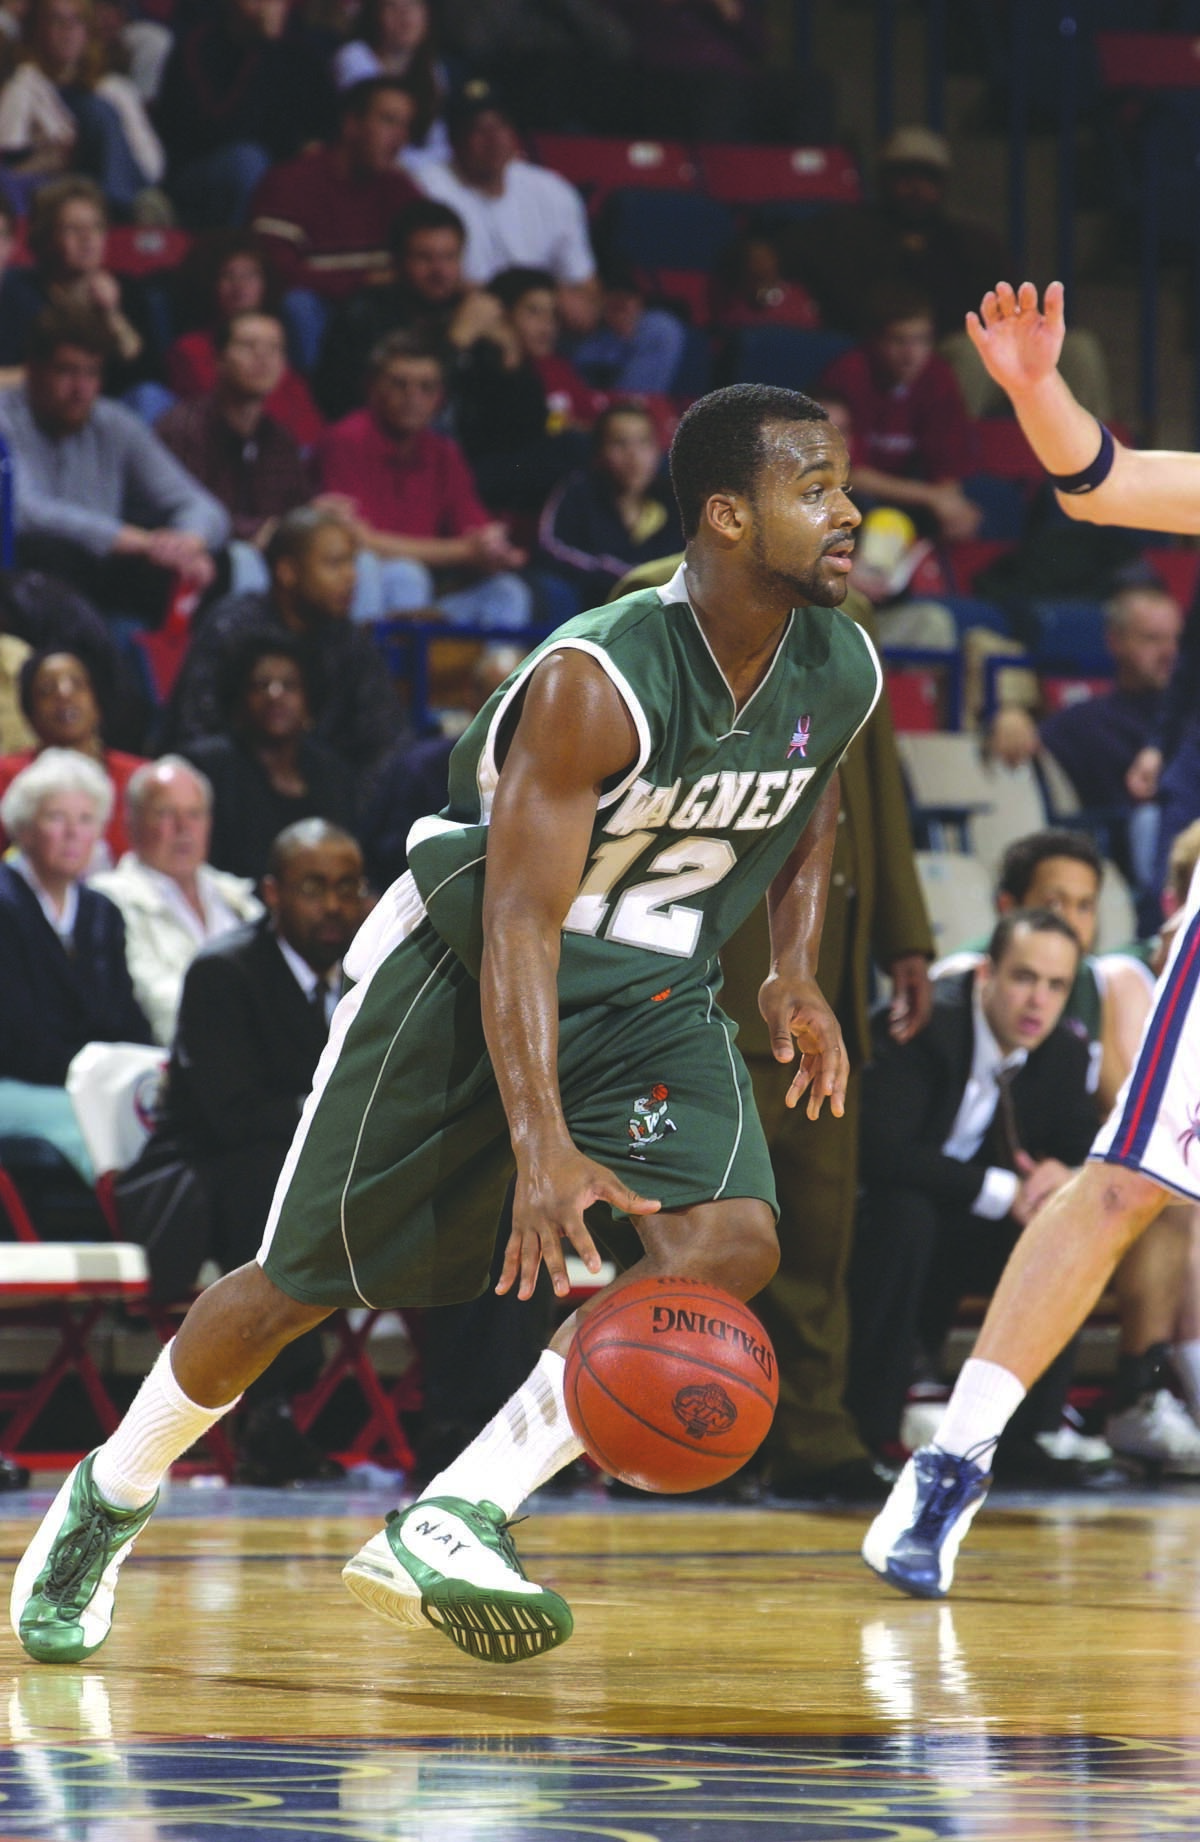 Southampton alum Courtney Pritchard was a star point guard for Wagner College in the early 2000's and was recently inducted into the school's Hall of Fame. He led the team to the NCAA tournament in his junior year. COURTESY WAGNER ATHLETICS